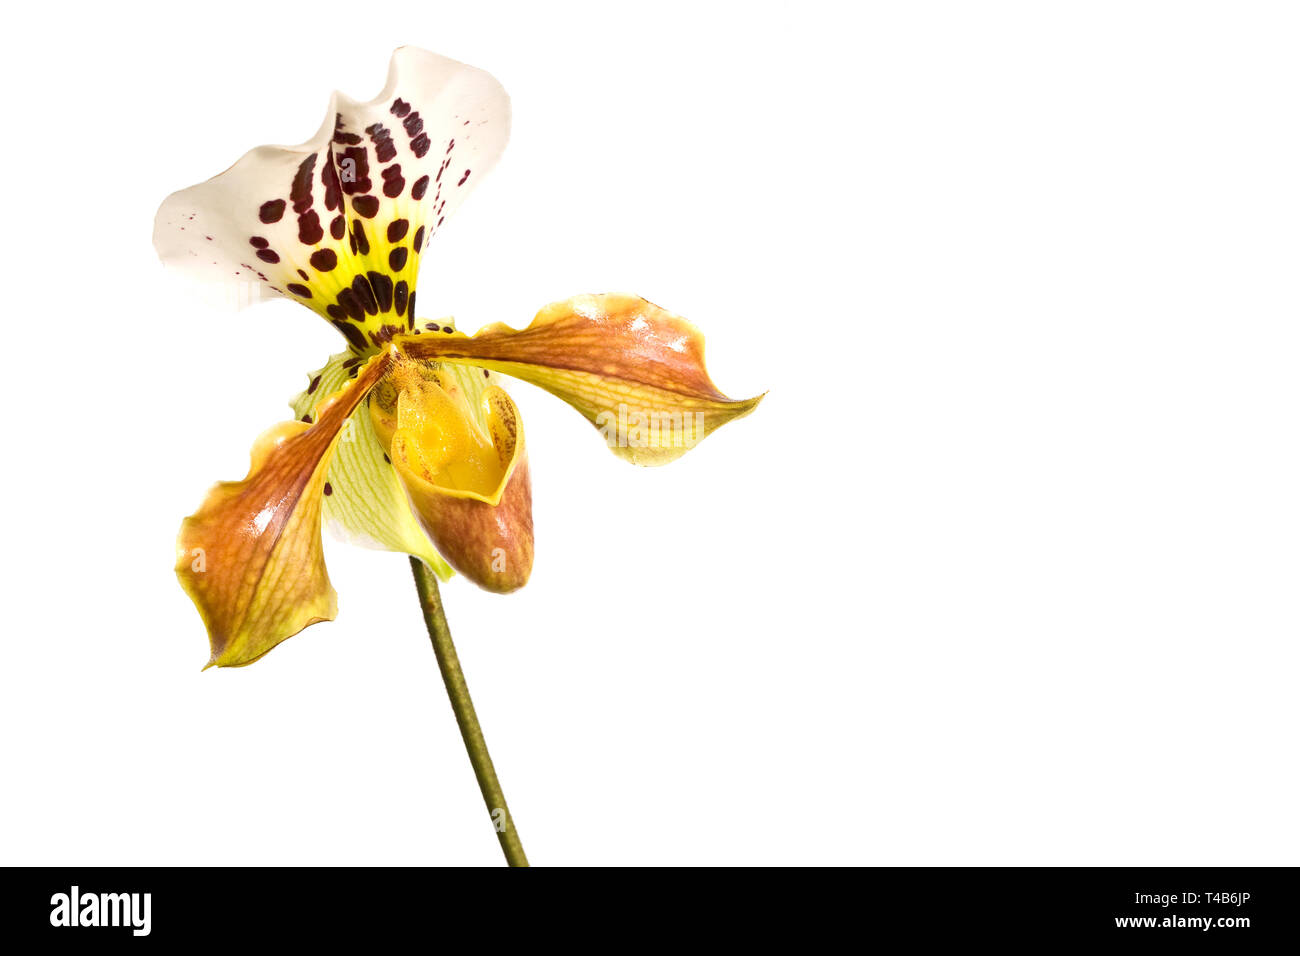 Yellow Lady slipper (paphiopedilum) orchid, close-up isolated on white background Stock Photo